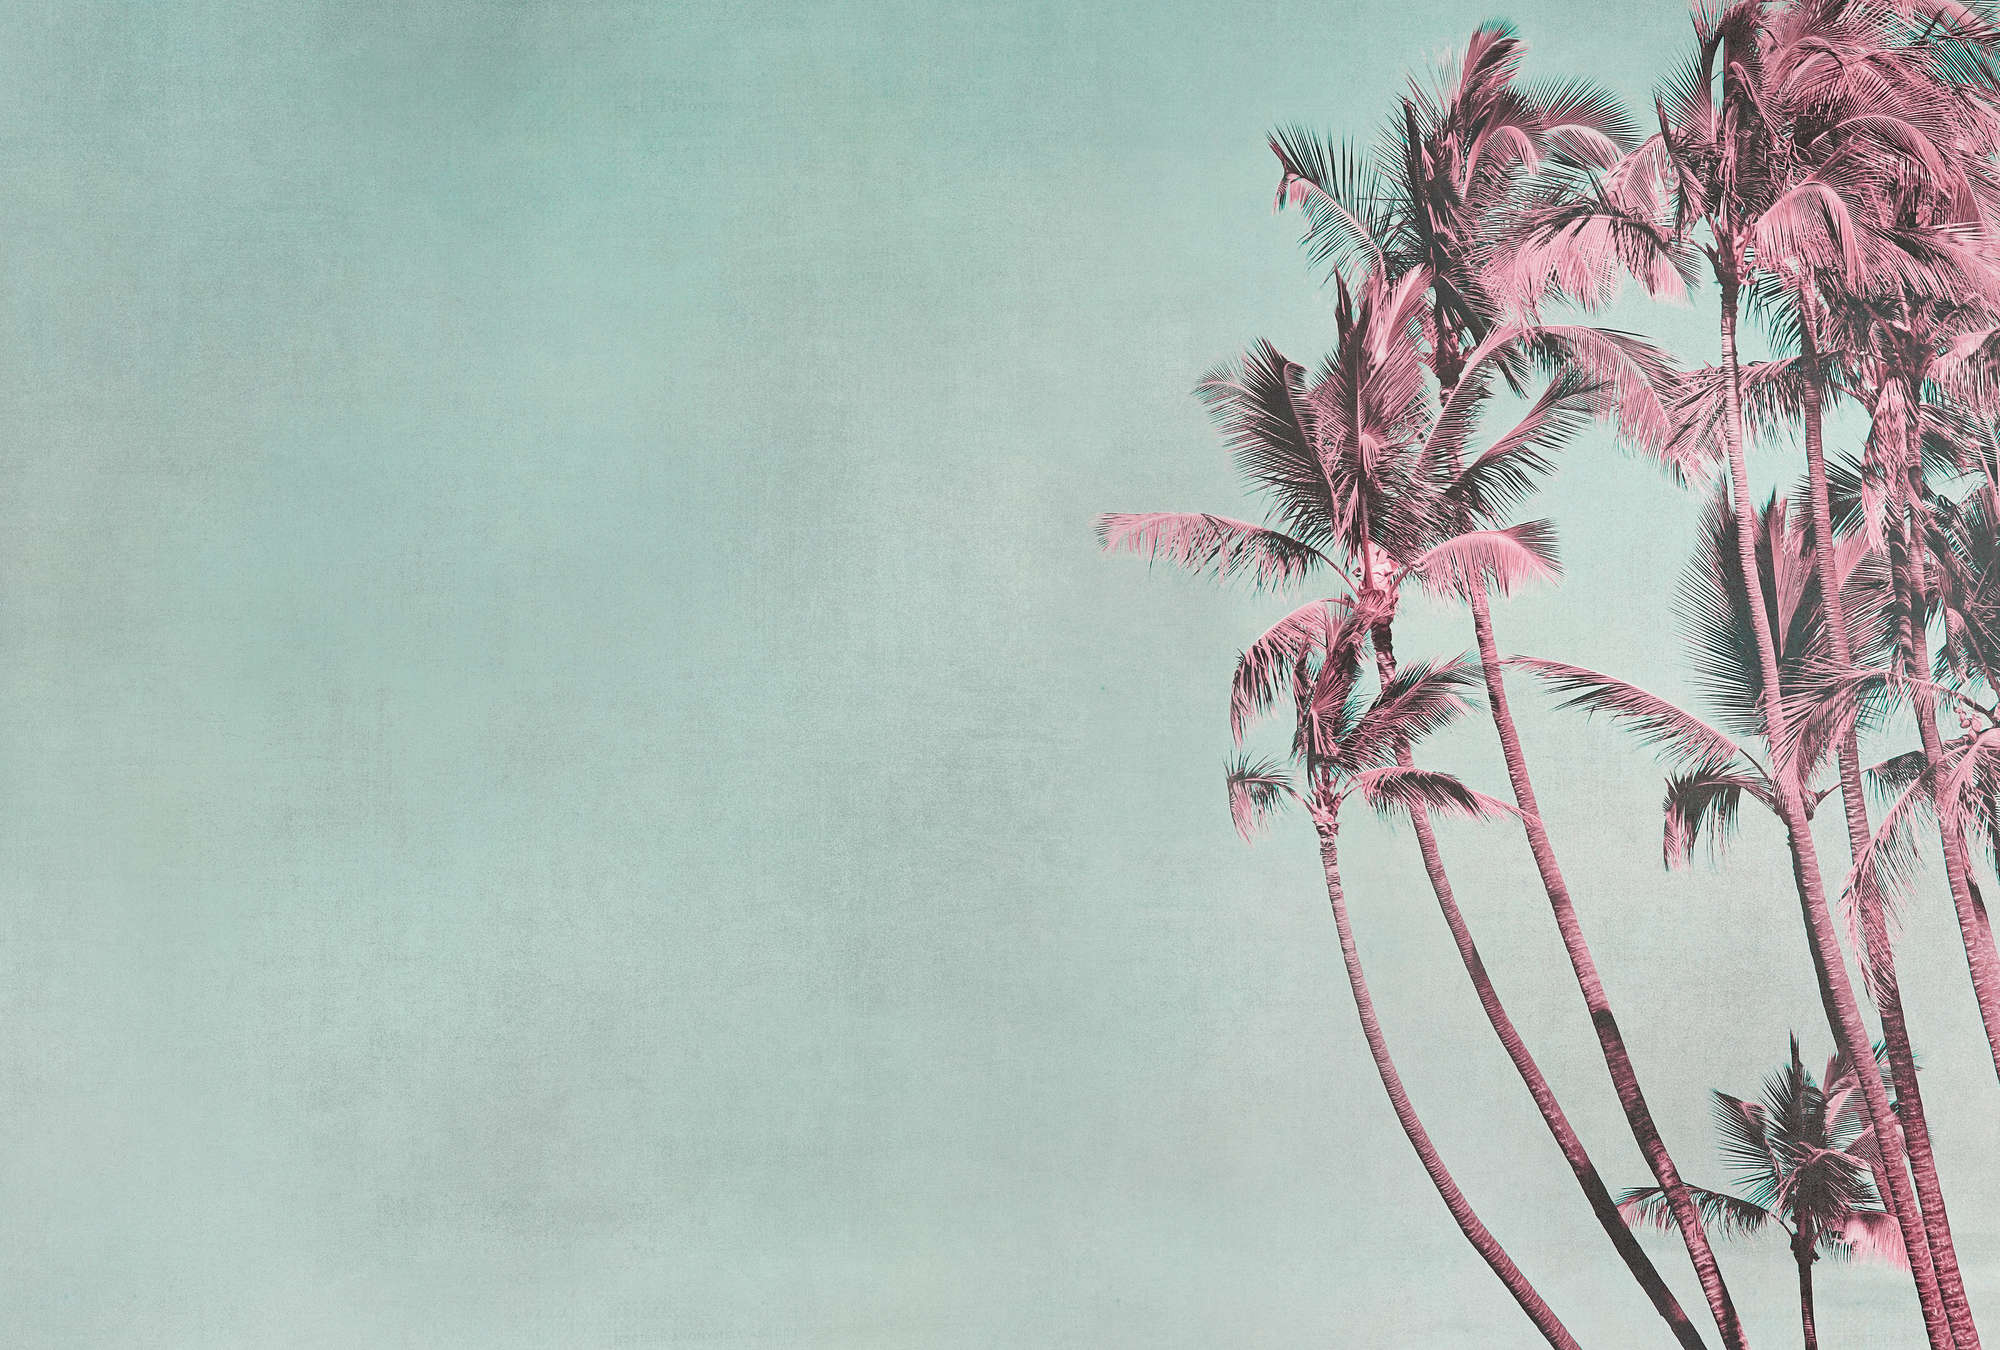             Palm trees mural Tropical Breeze in turquoise & pink
        